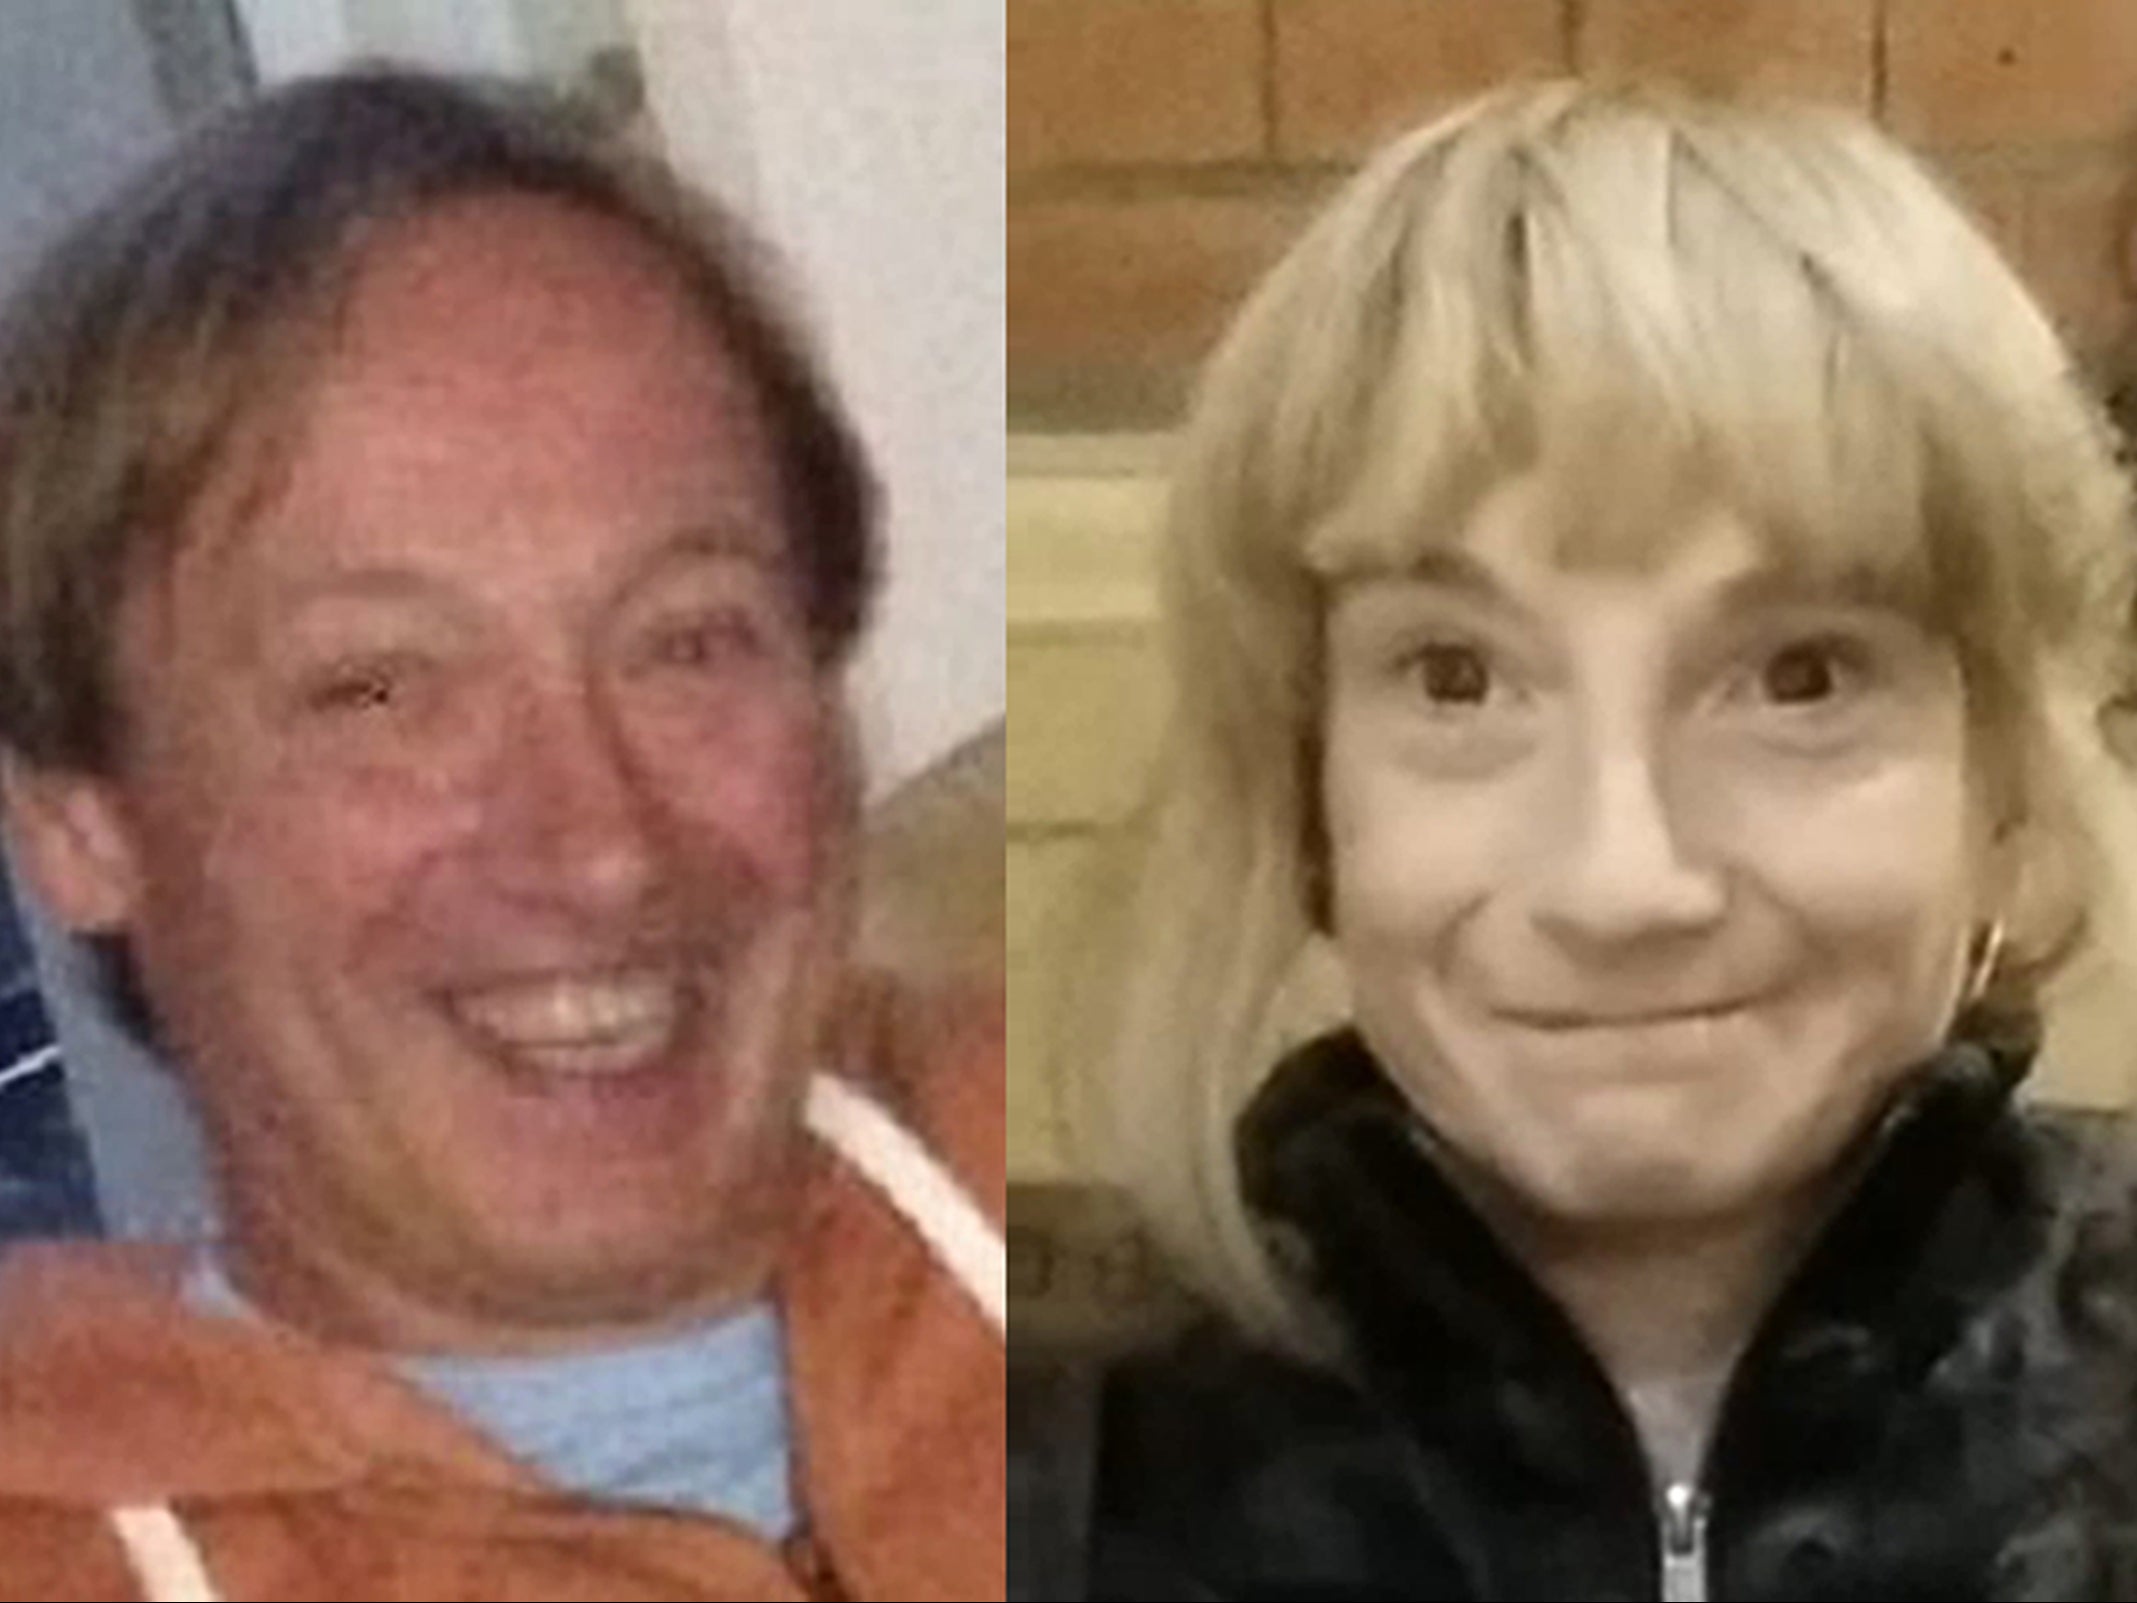 The deaths of Sharon Pickles, aged 49, and Clinton Ashmore, 59, are being treated as connected incidents